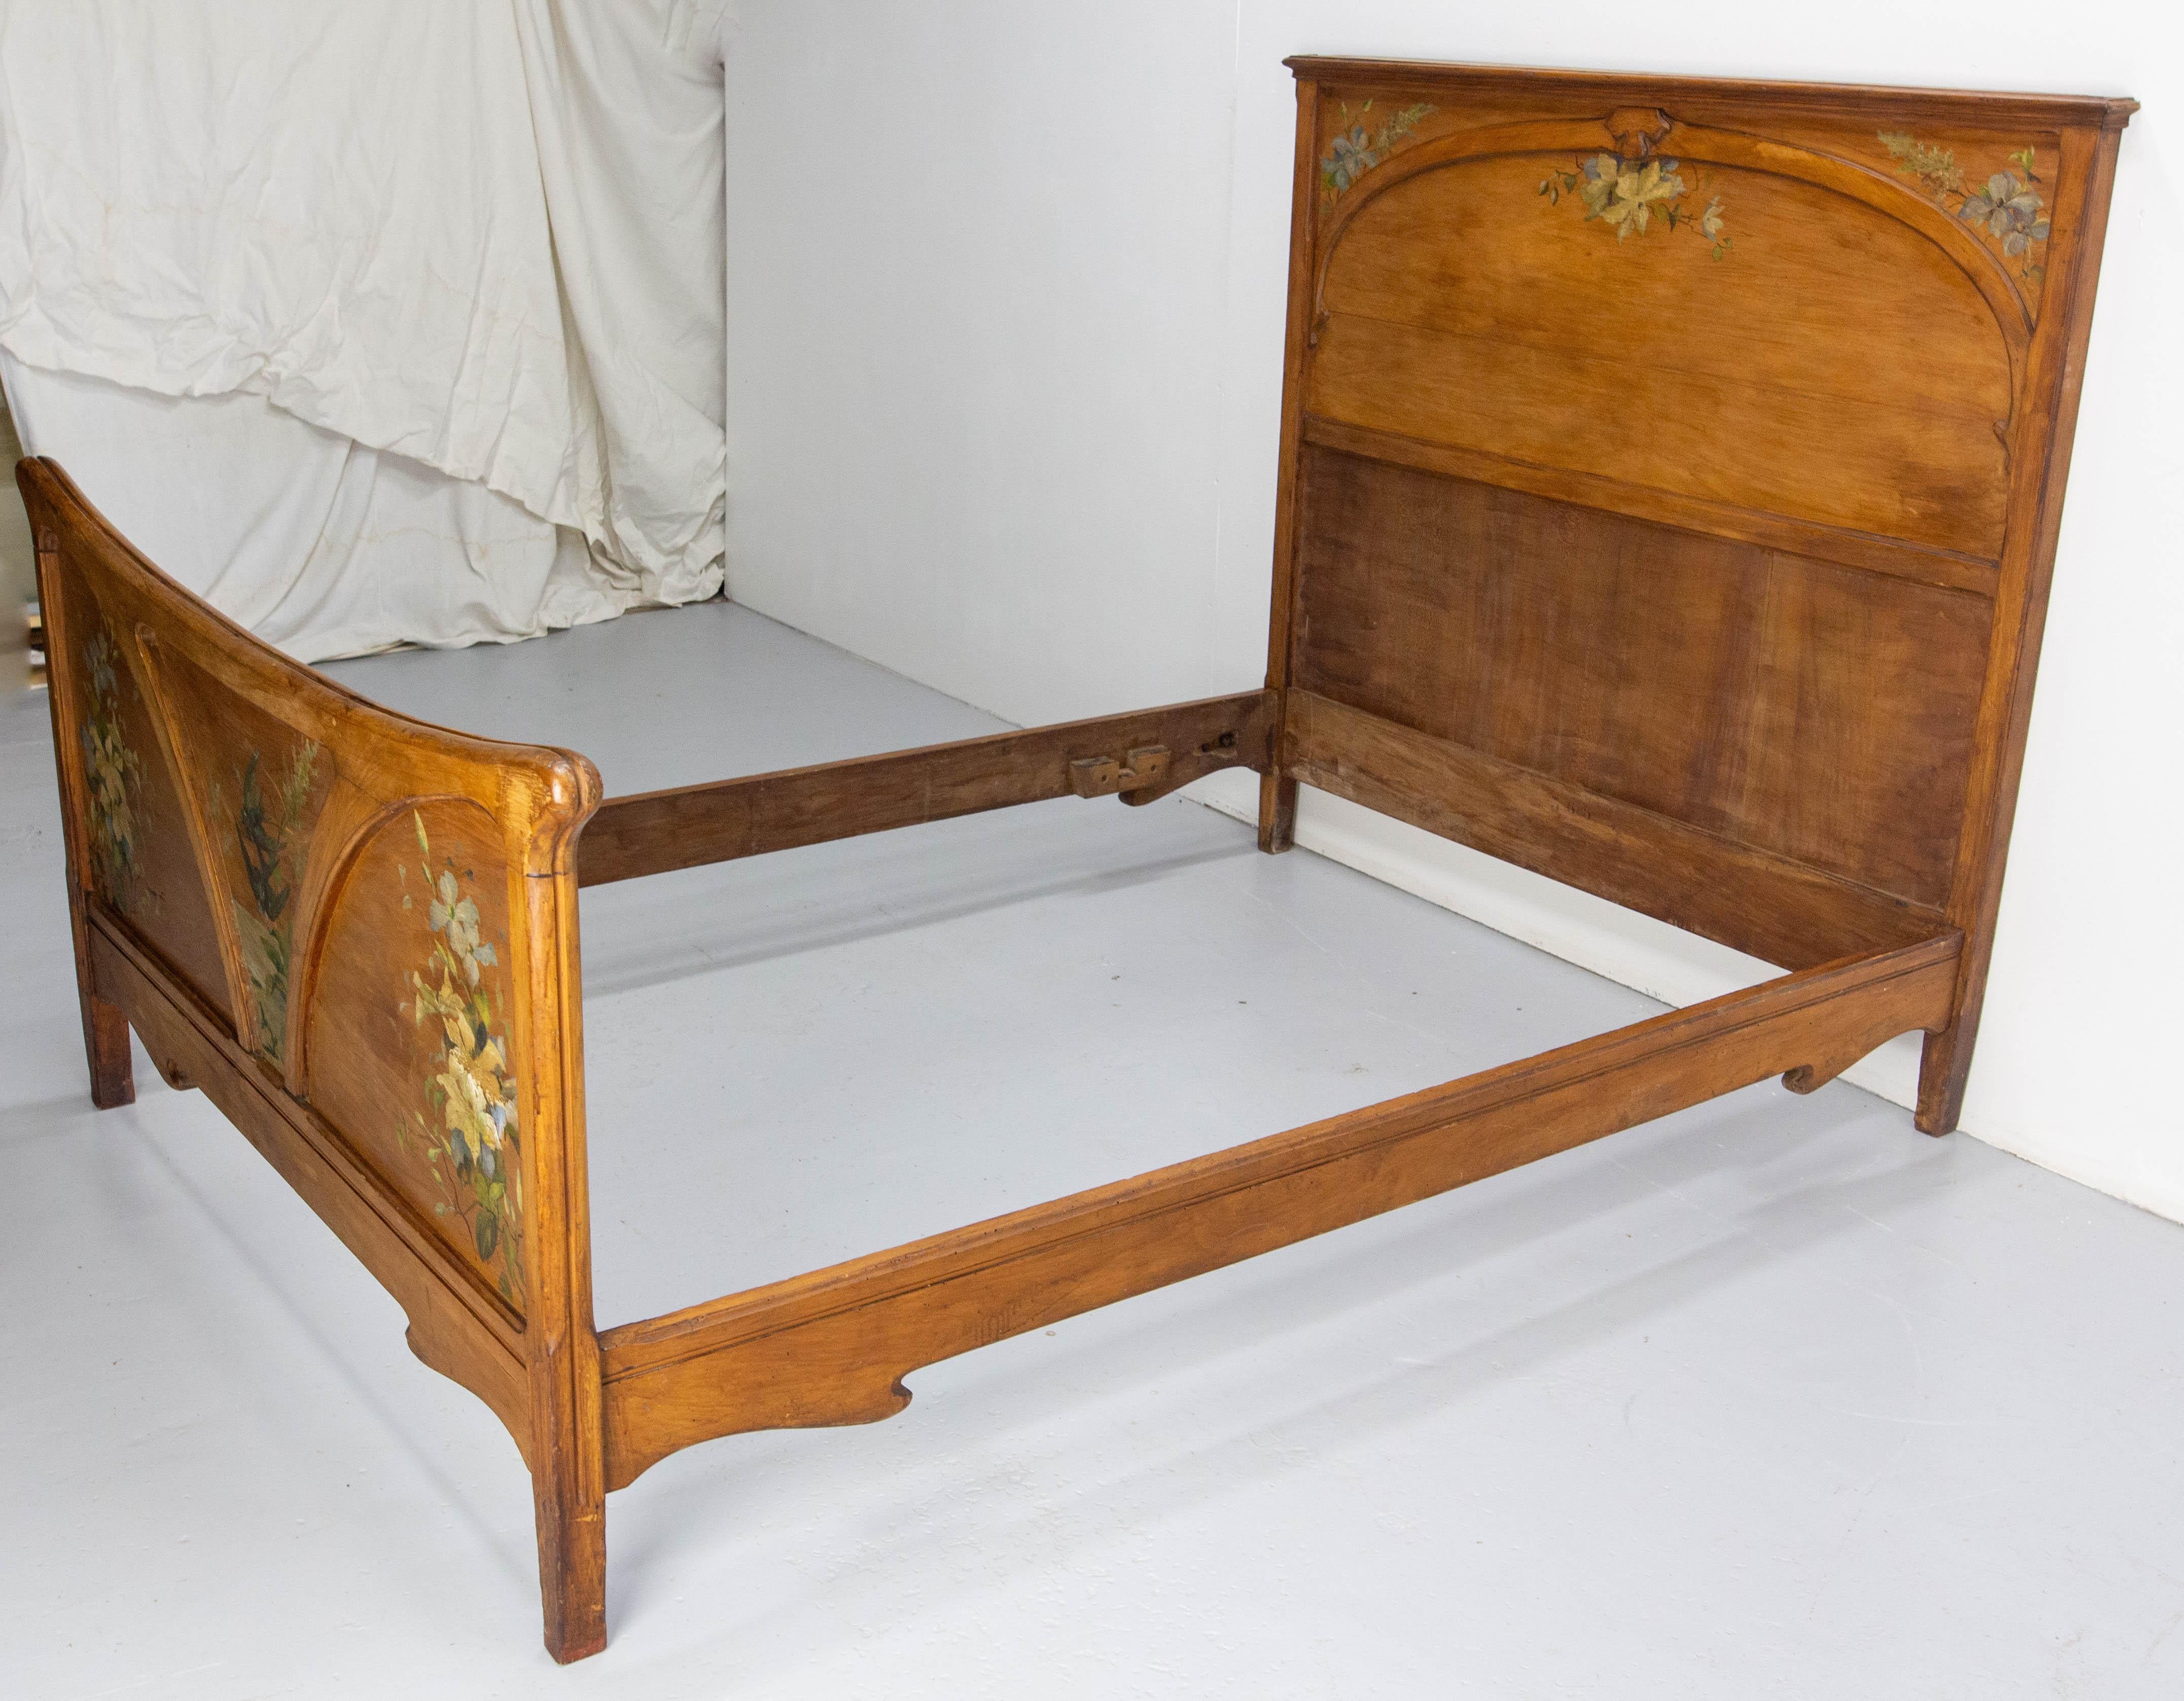 19th Century French Art Nouveau Painted Massive Beech Bed Full Size or Double Bed, circa 1890 For Sale